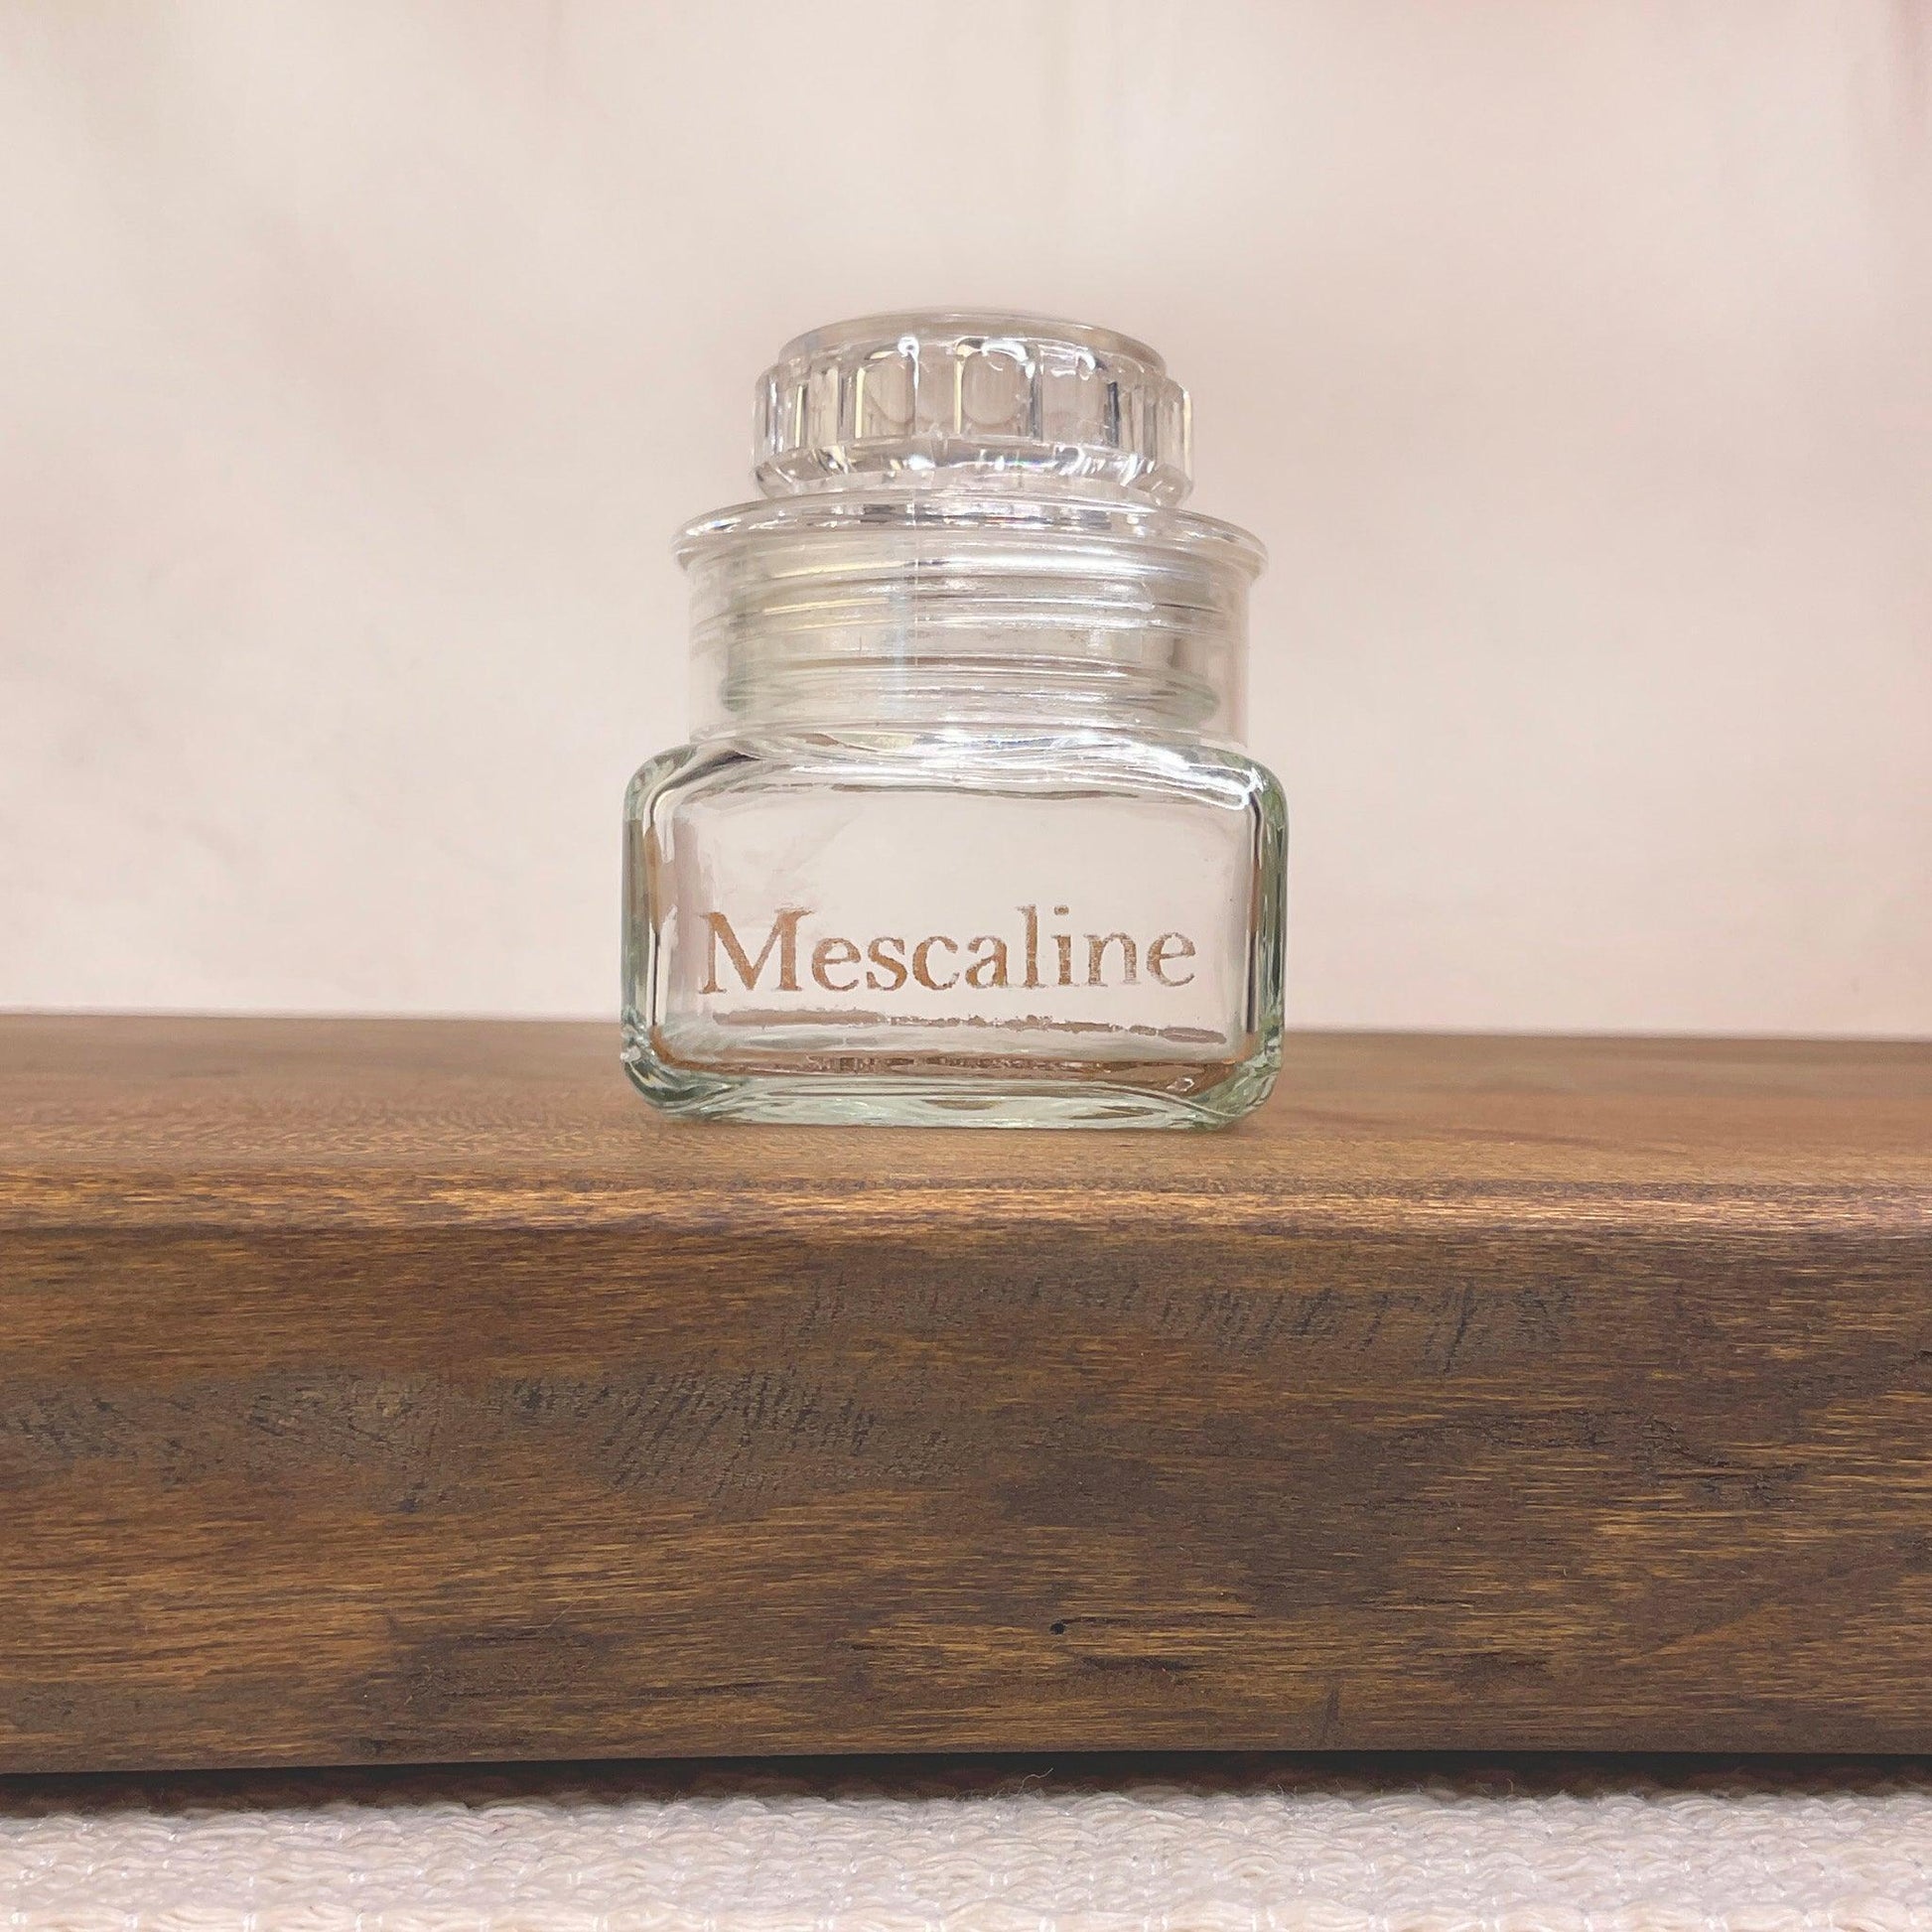 Mescaline Apothecary Jar - Offensively Domestic